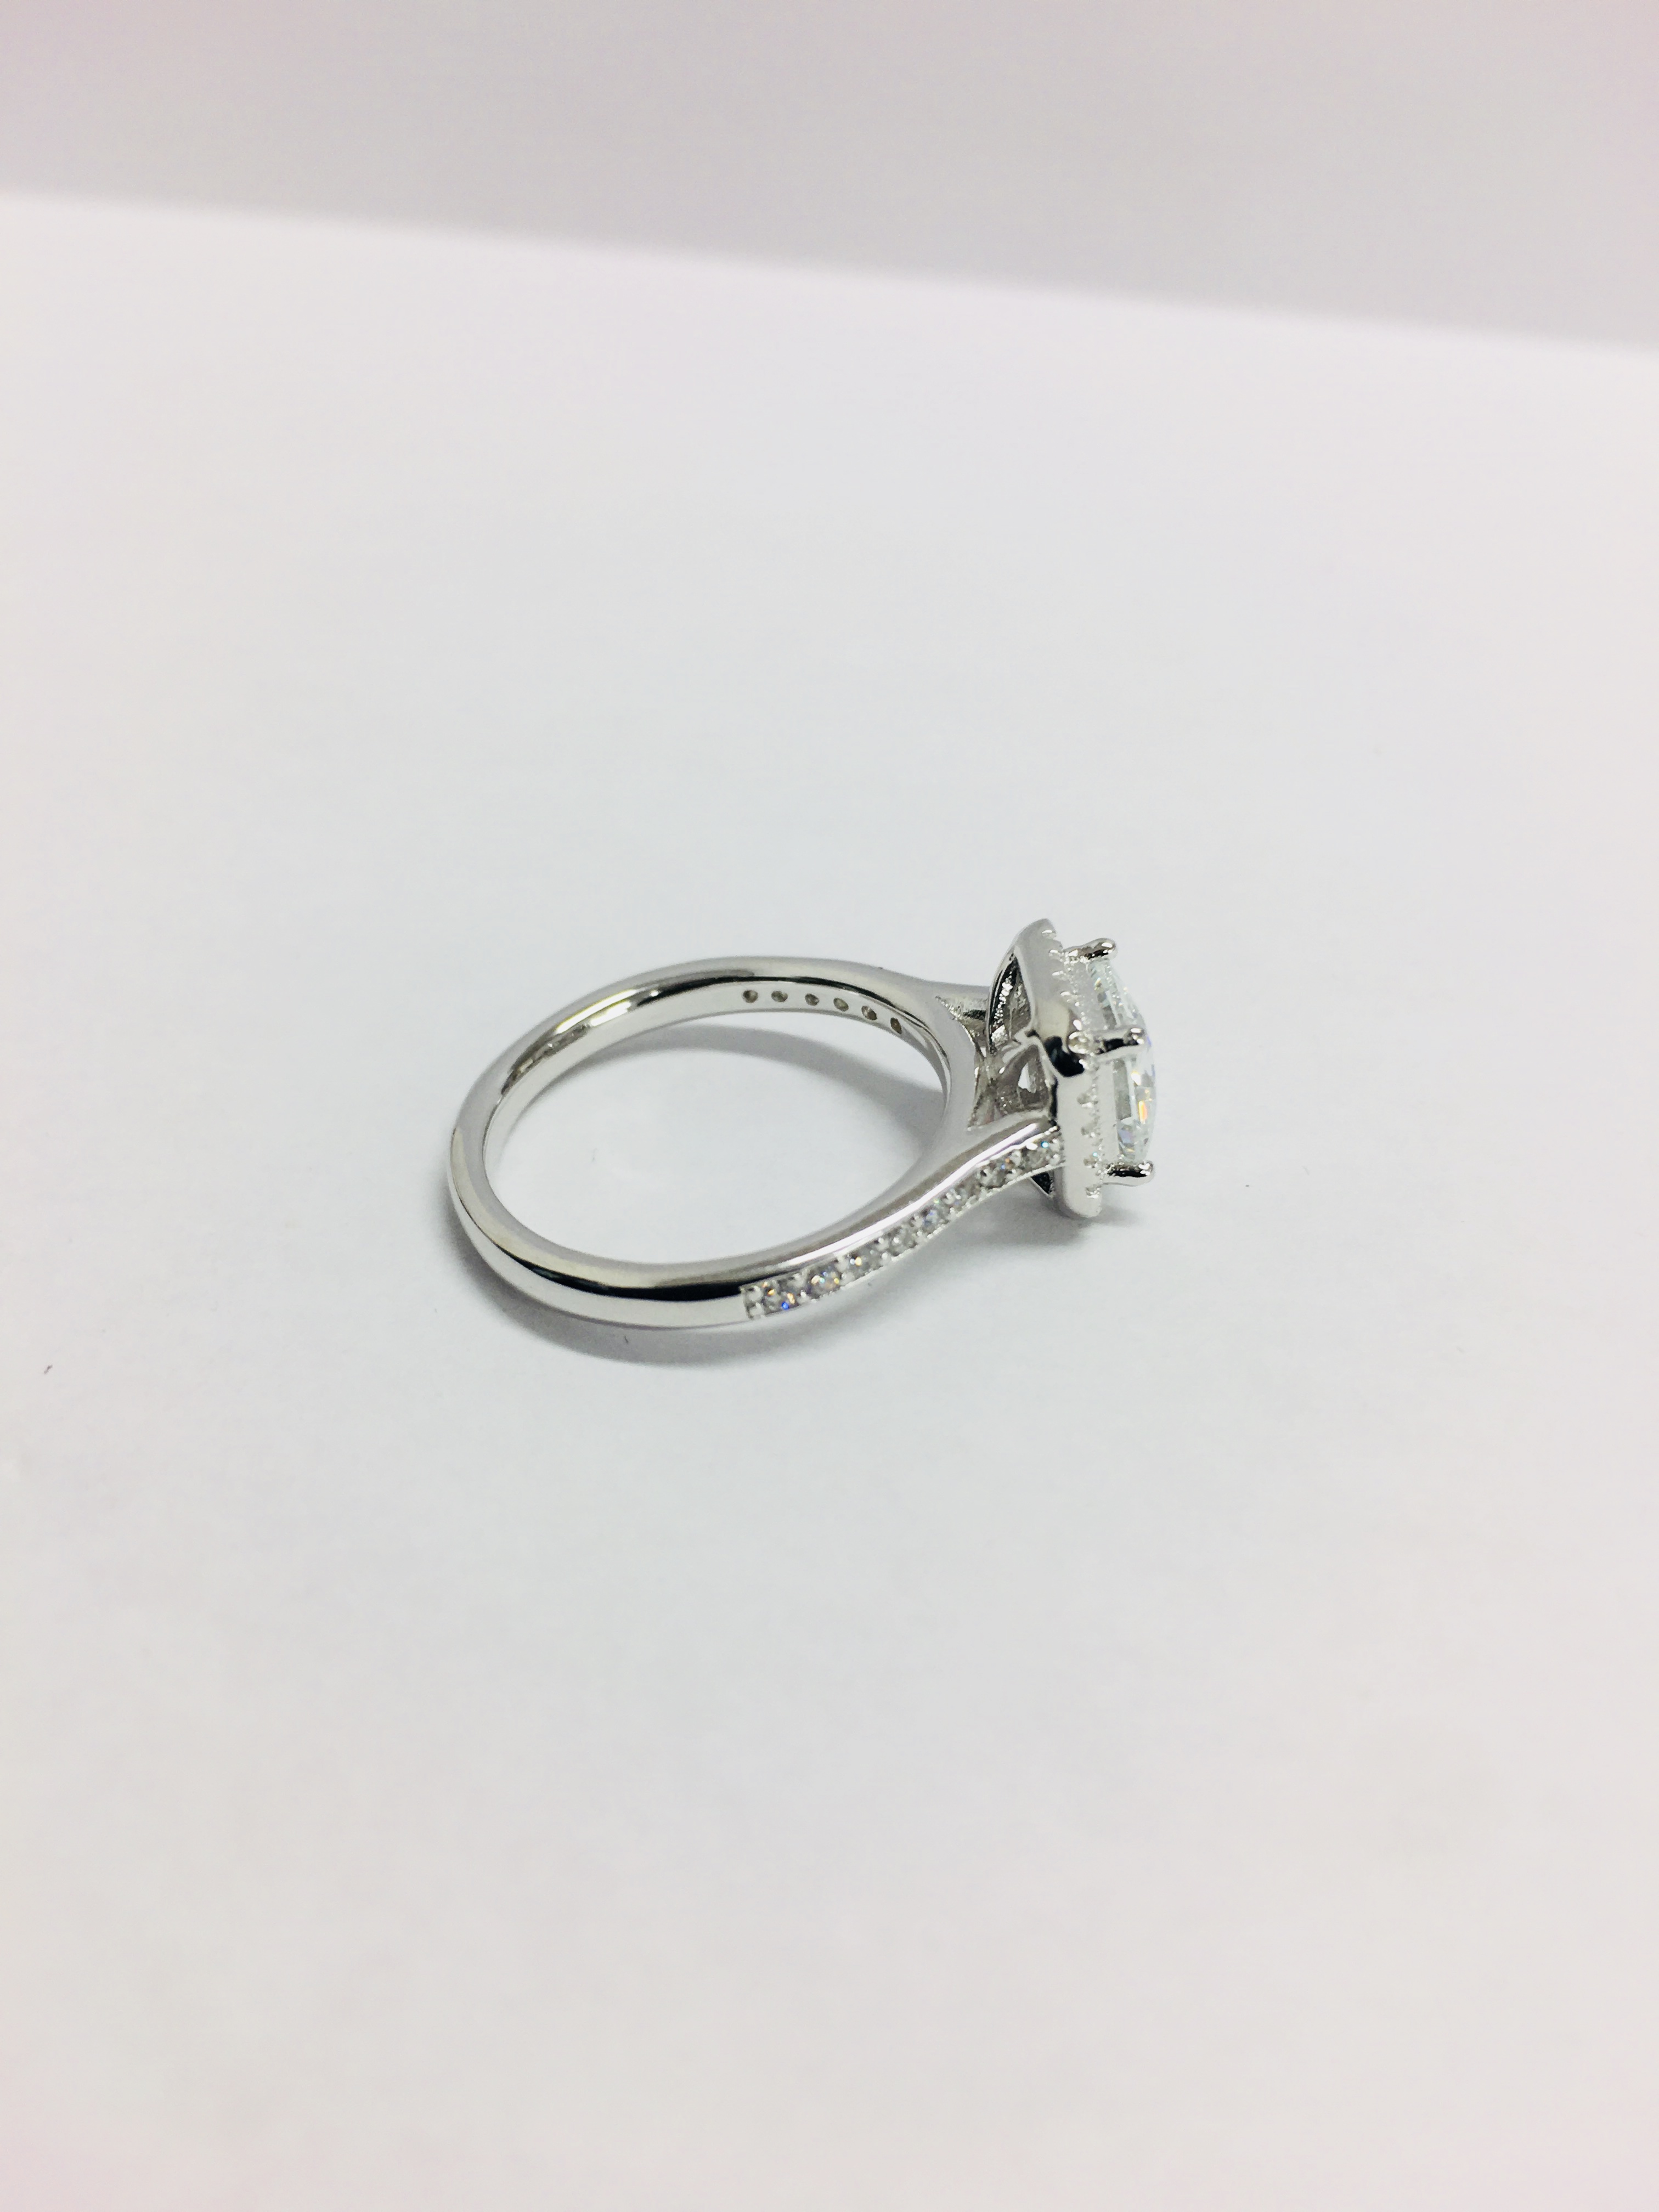 1.00CTct diamond set solitaire ring with a princess cut diamond - Image 3 of 6